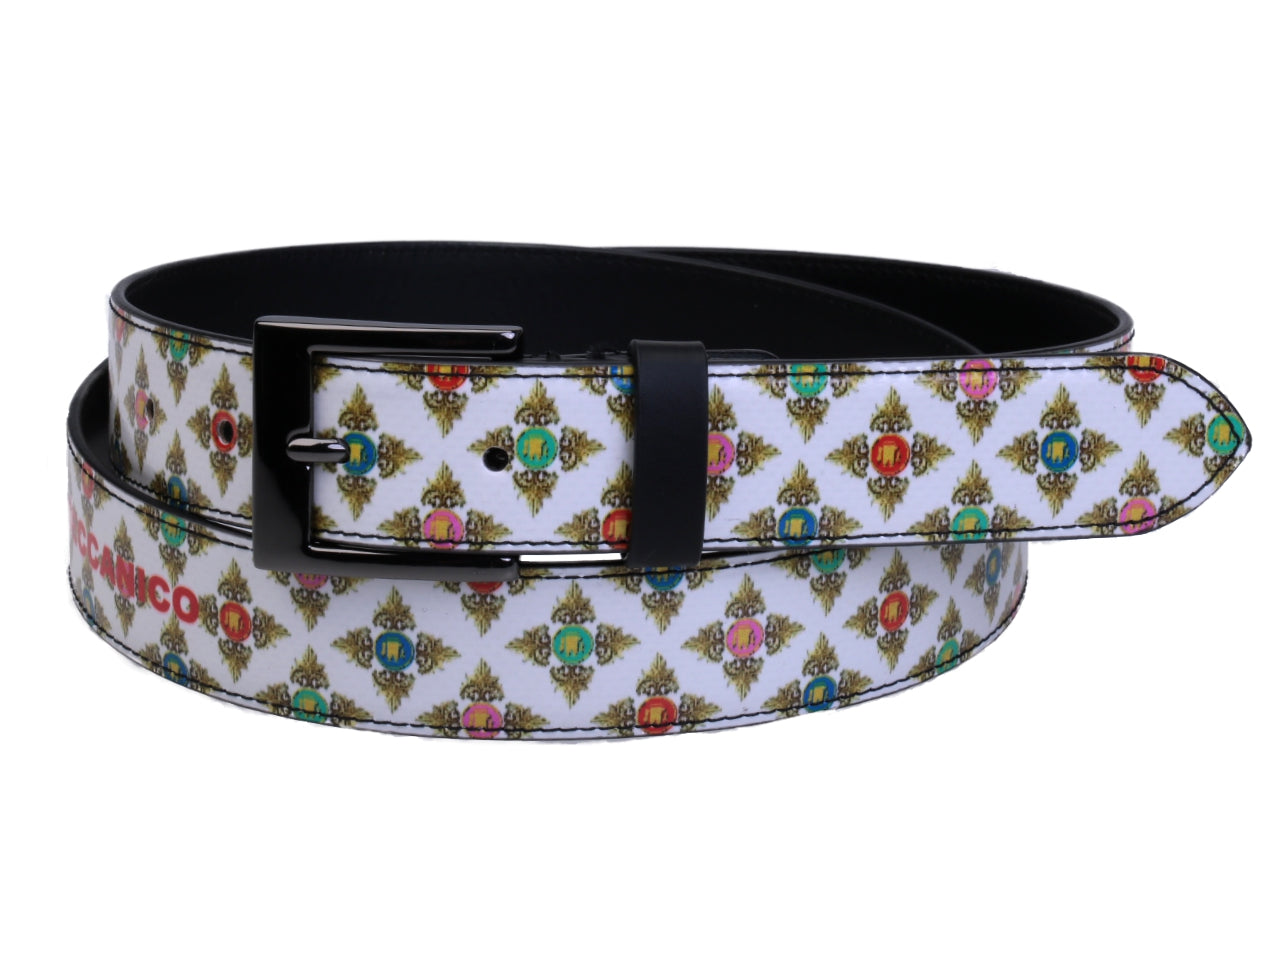 WHITE WOMEN'S BELT WITH LIBERTY FANTASY MADE OF LORRY TARPAULIN. - Unique Pieces Paul Meccanico